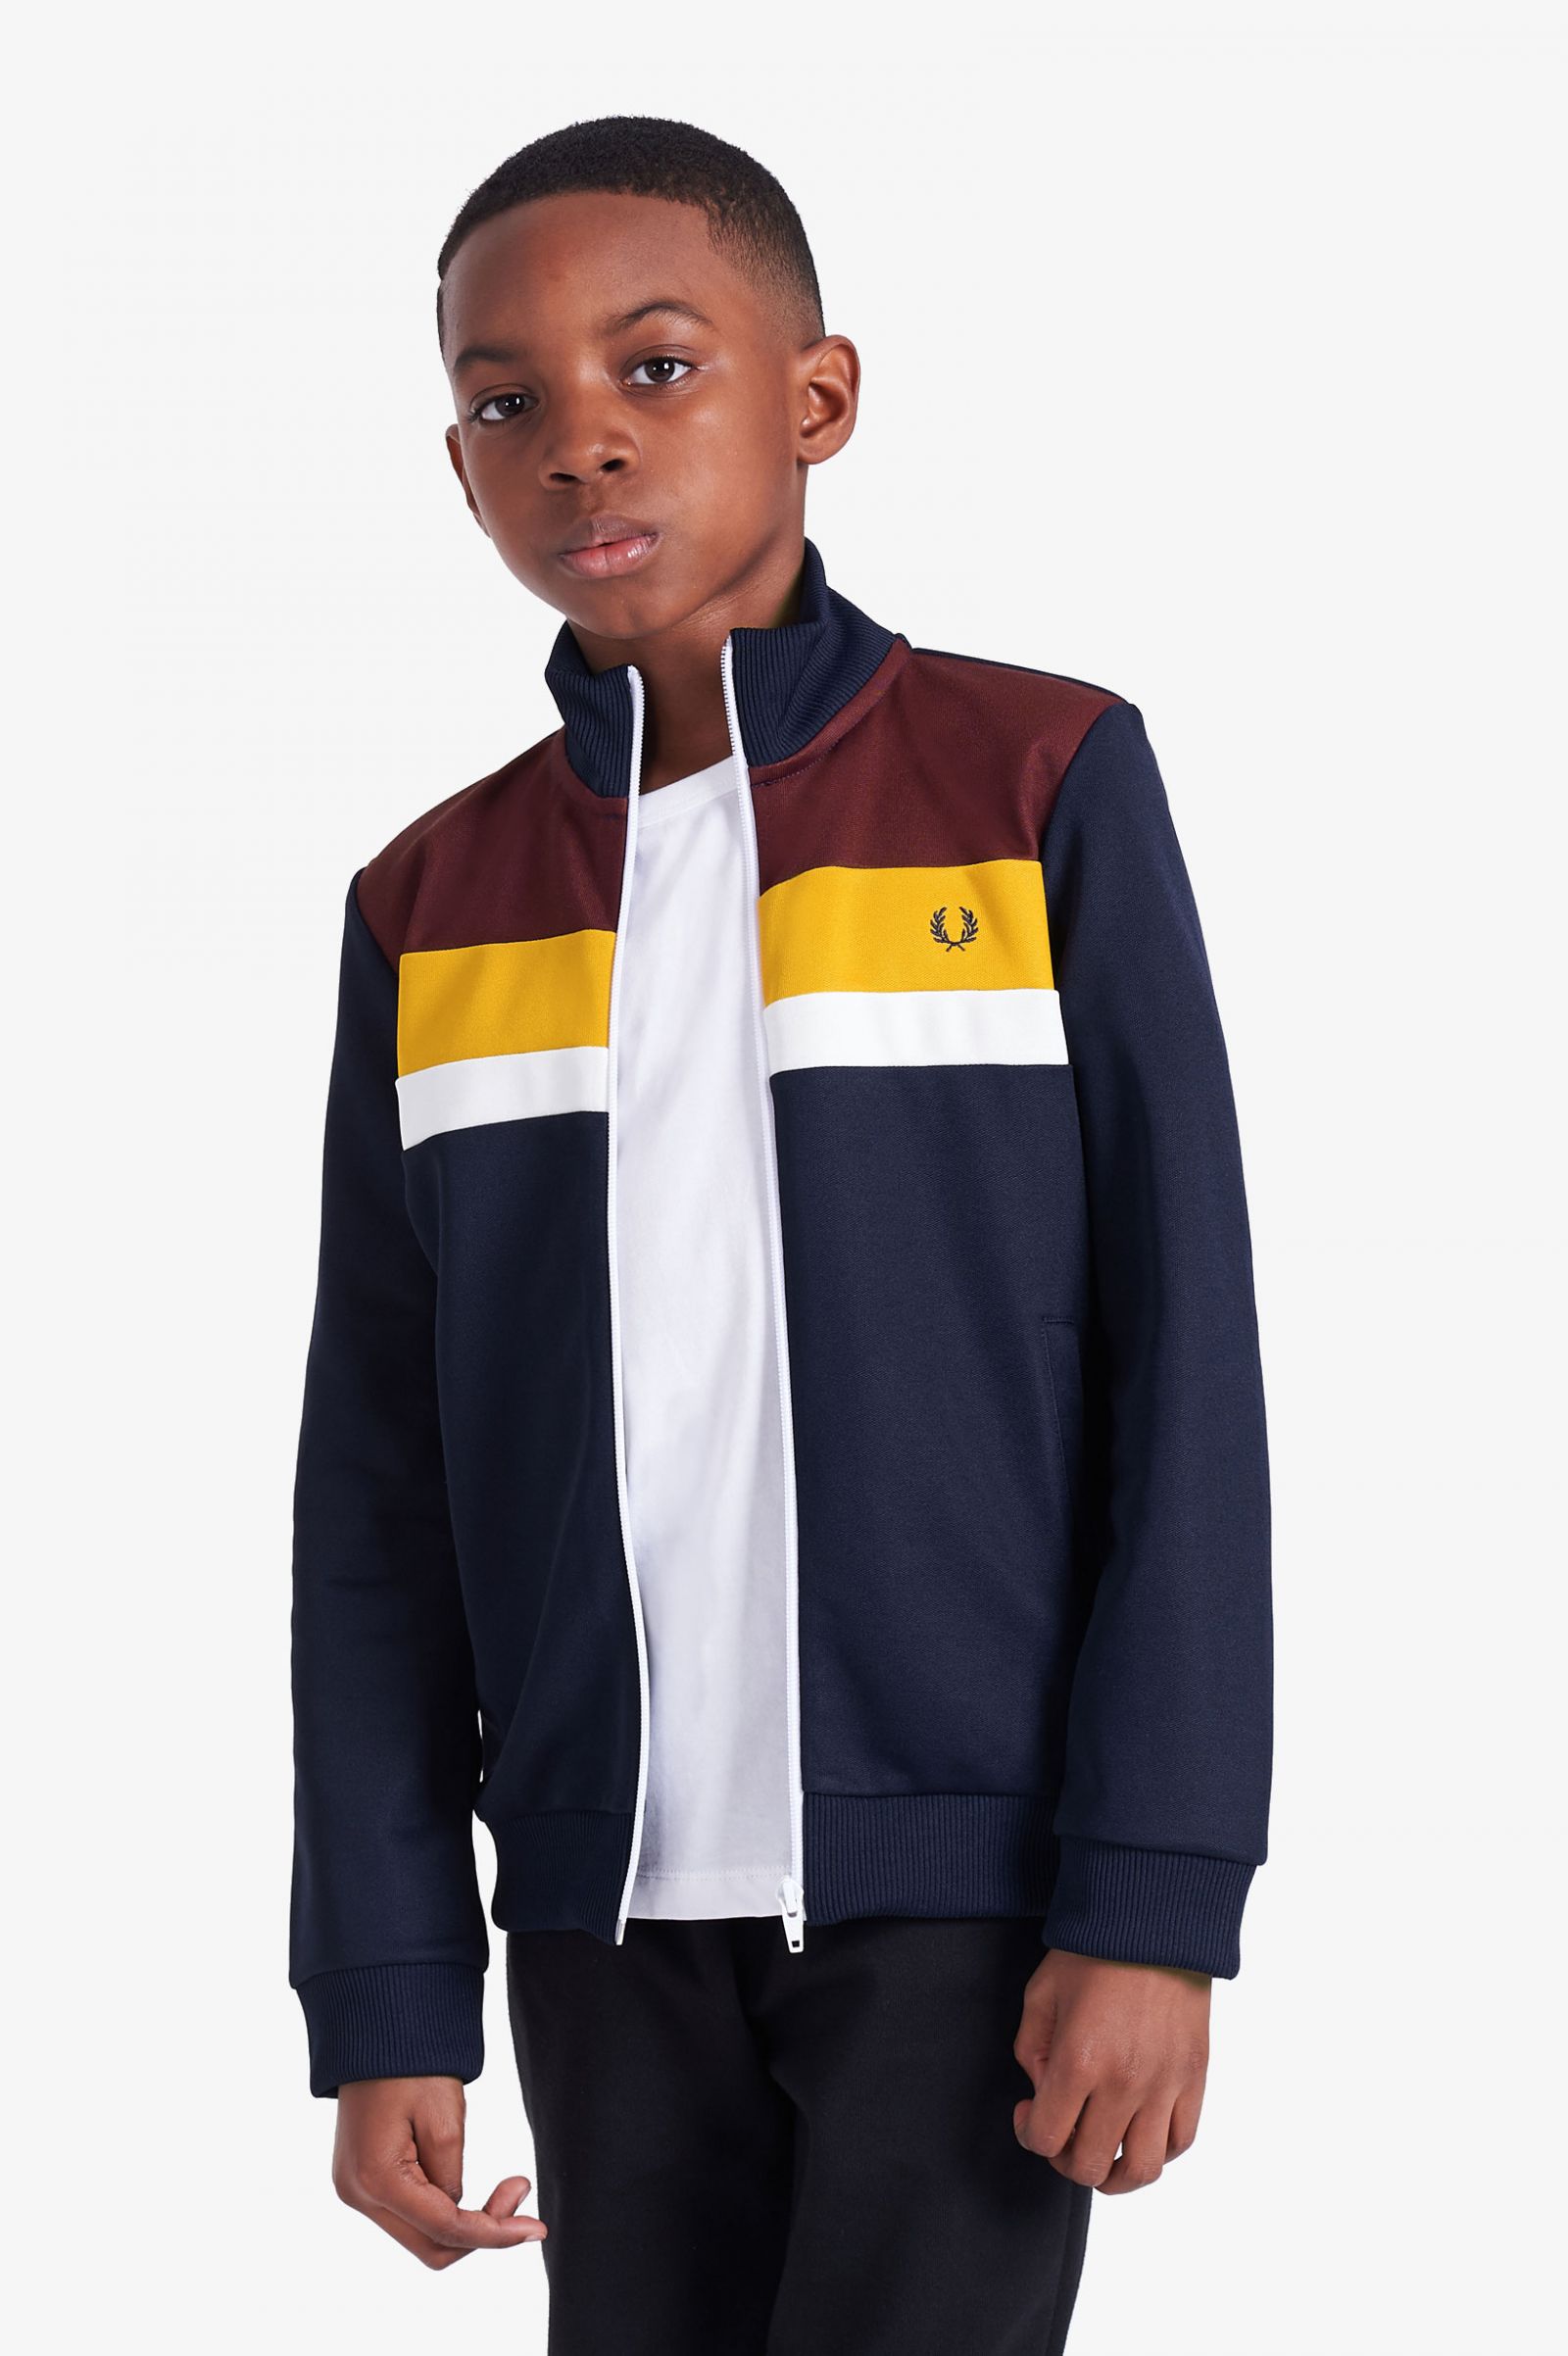 polo perry jacket